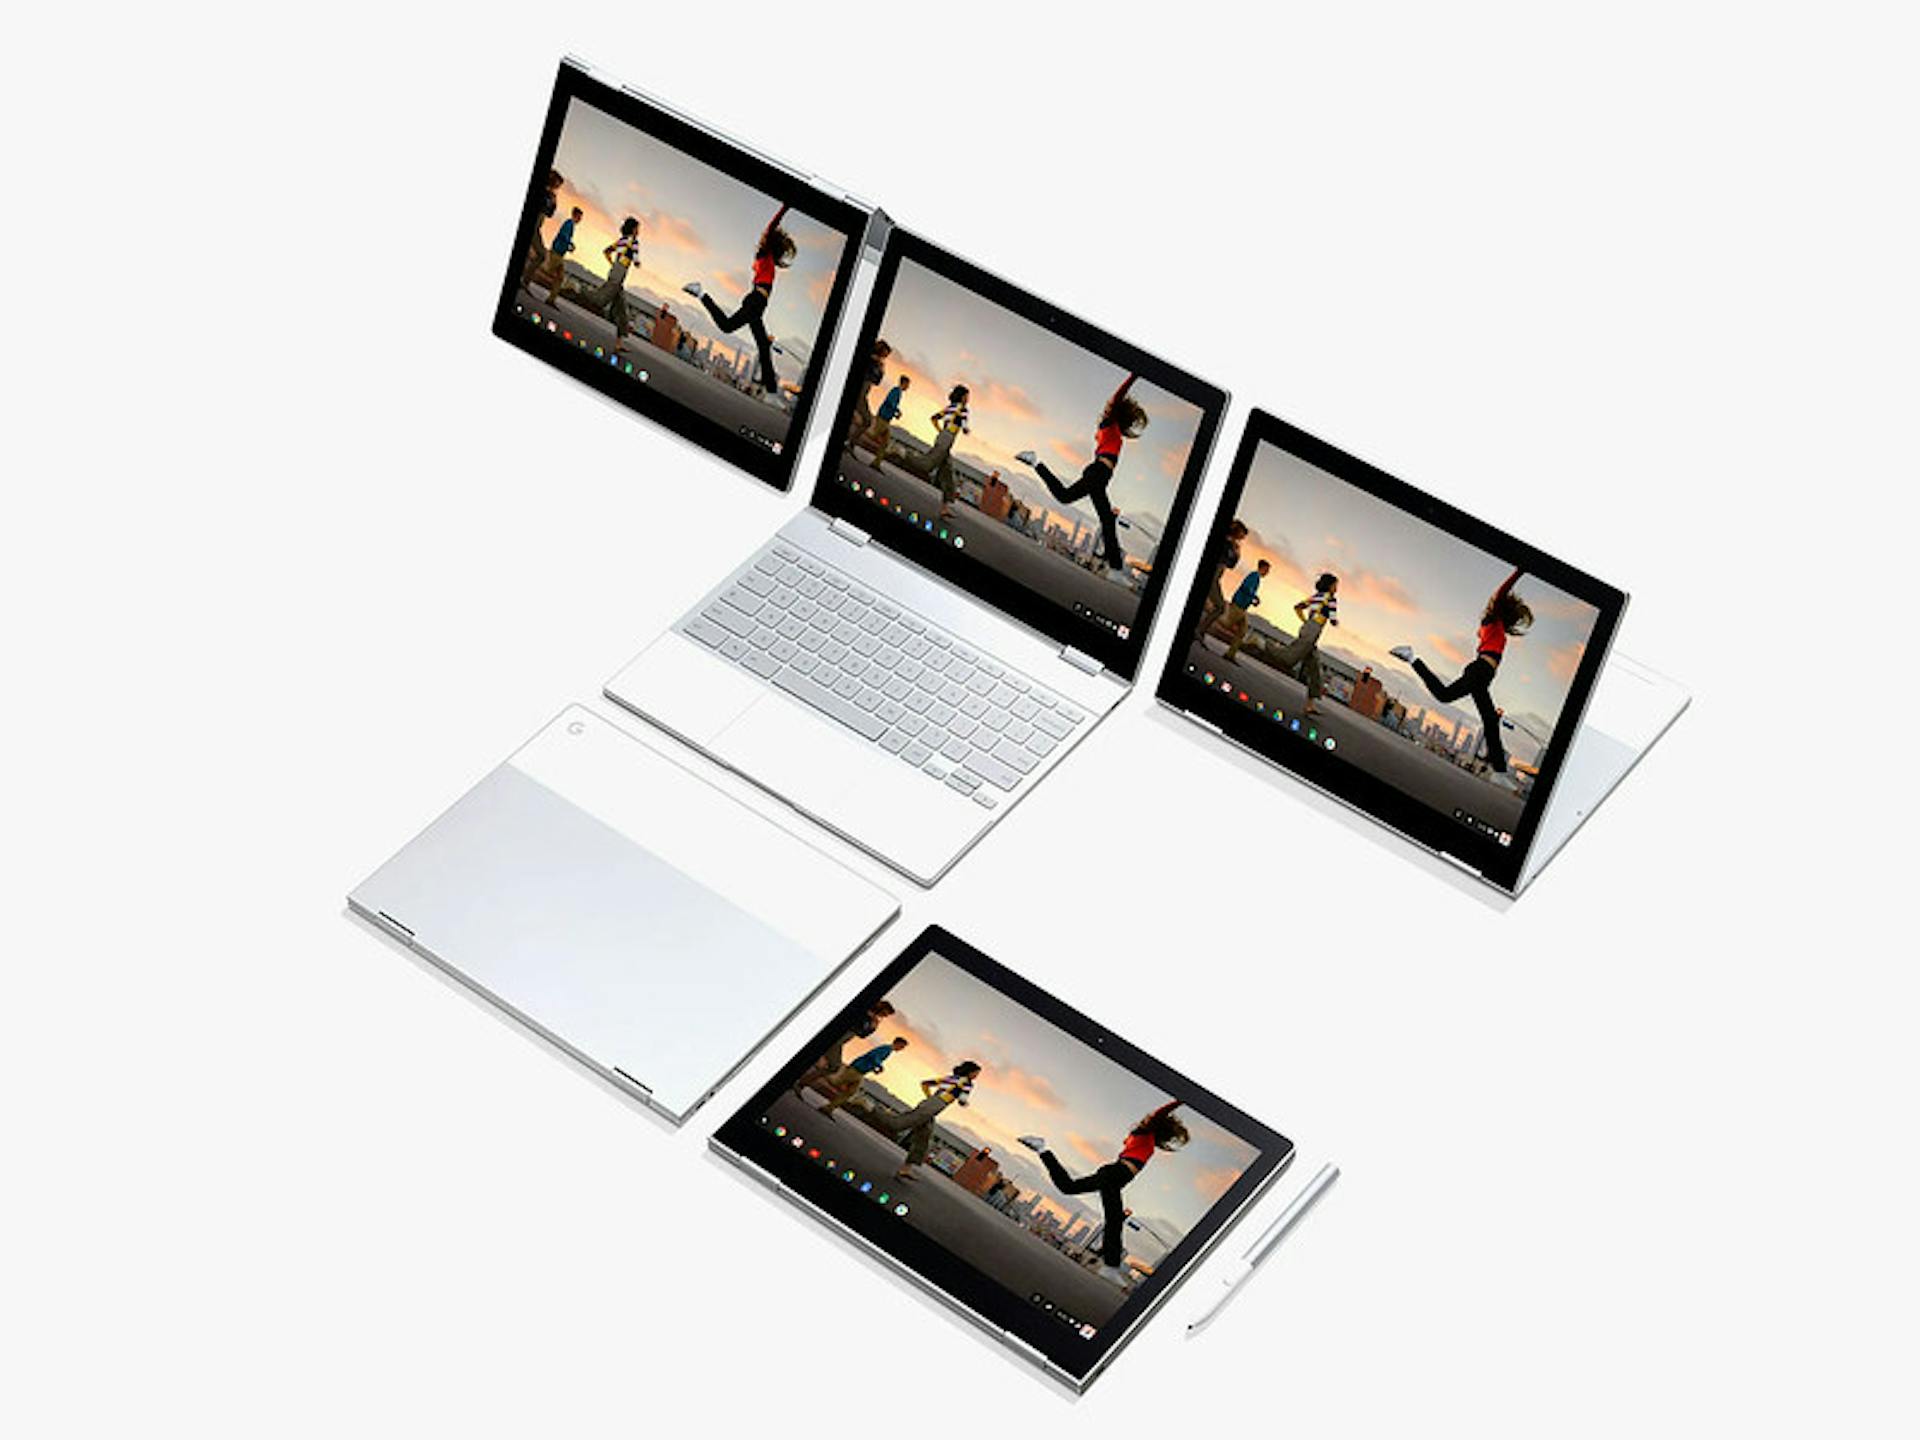 The Pixelbook can be used in many different positions, as a laptop or a tablet. Image credit: Google